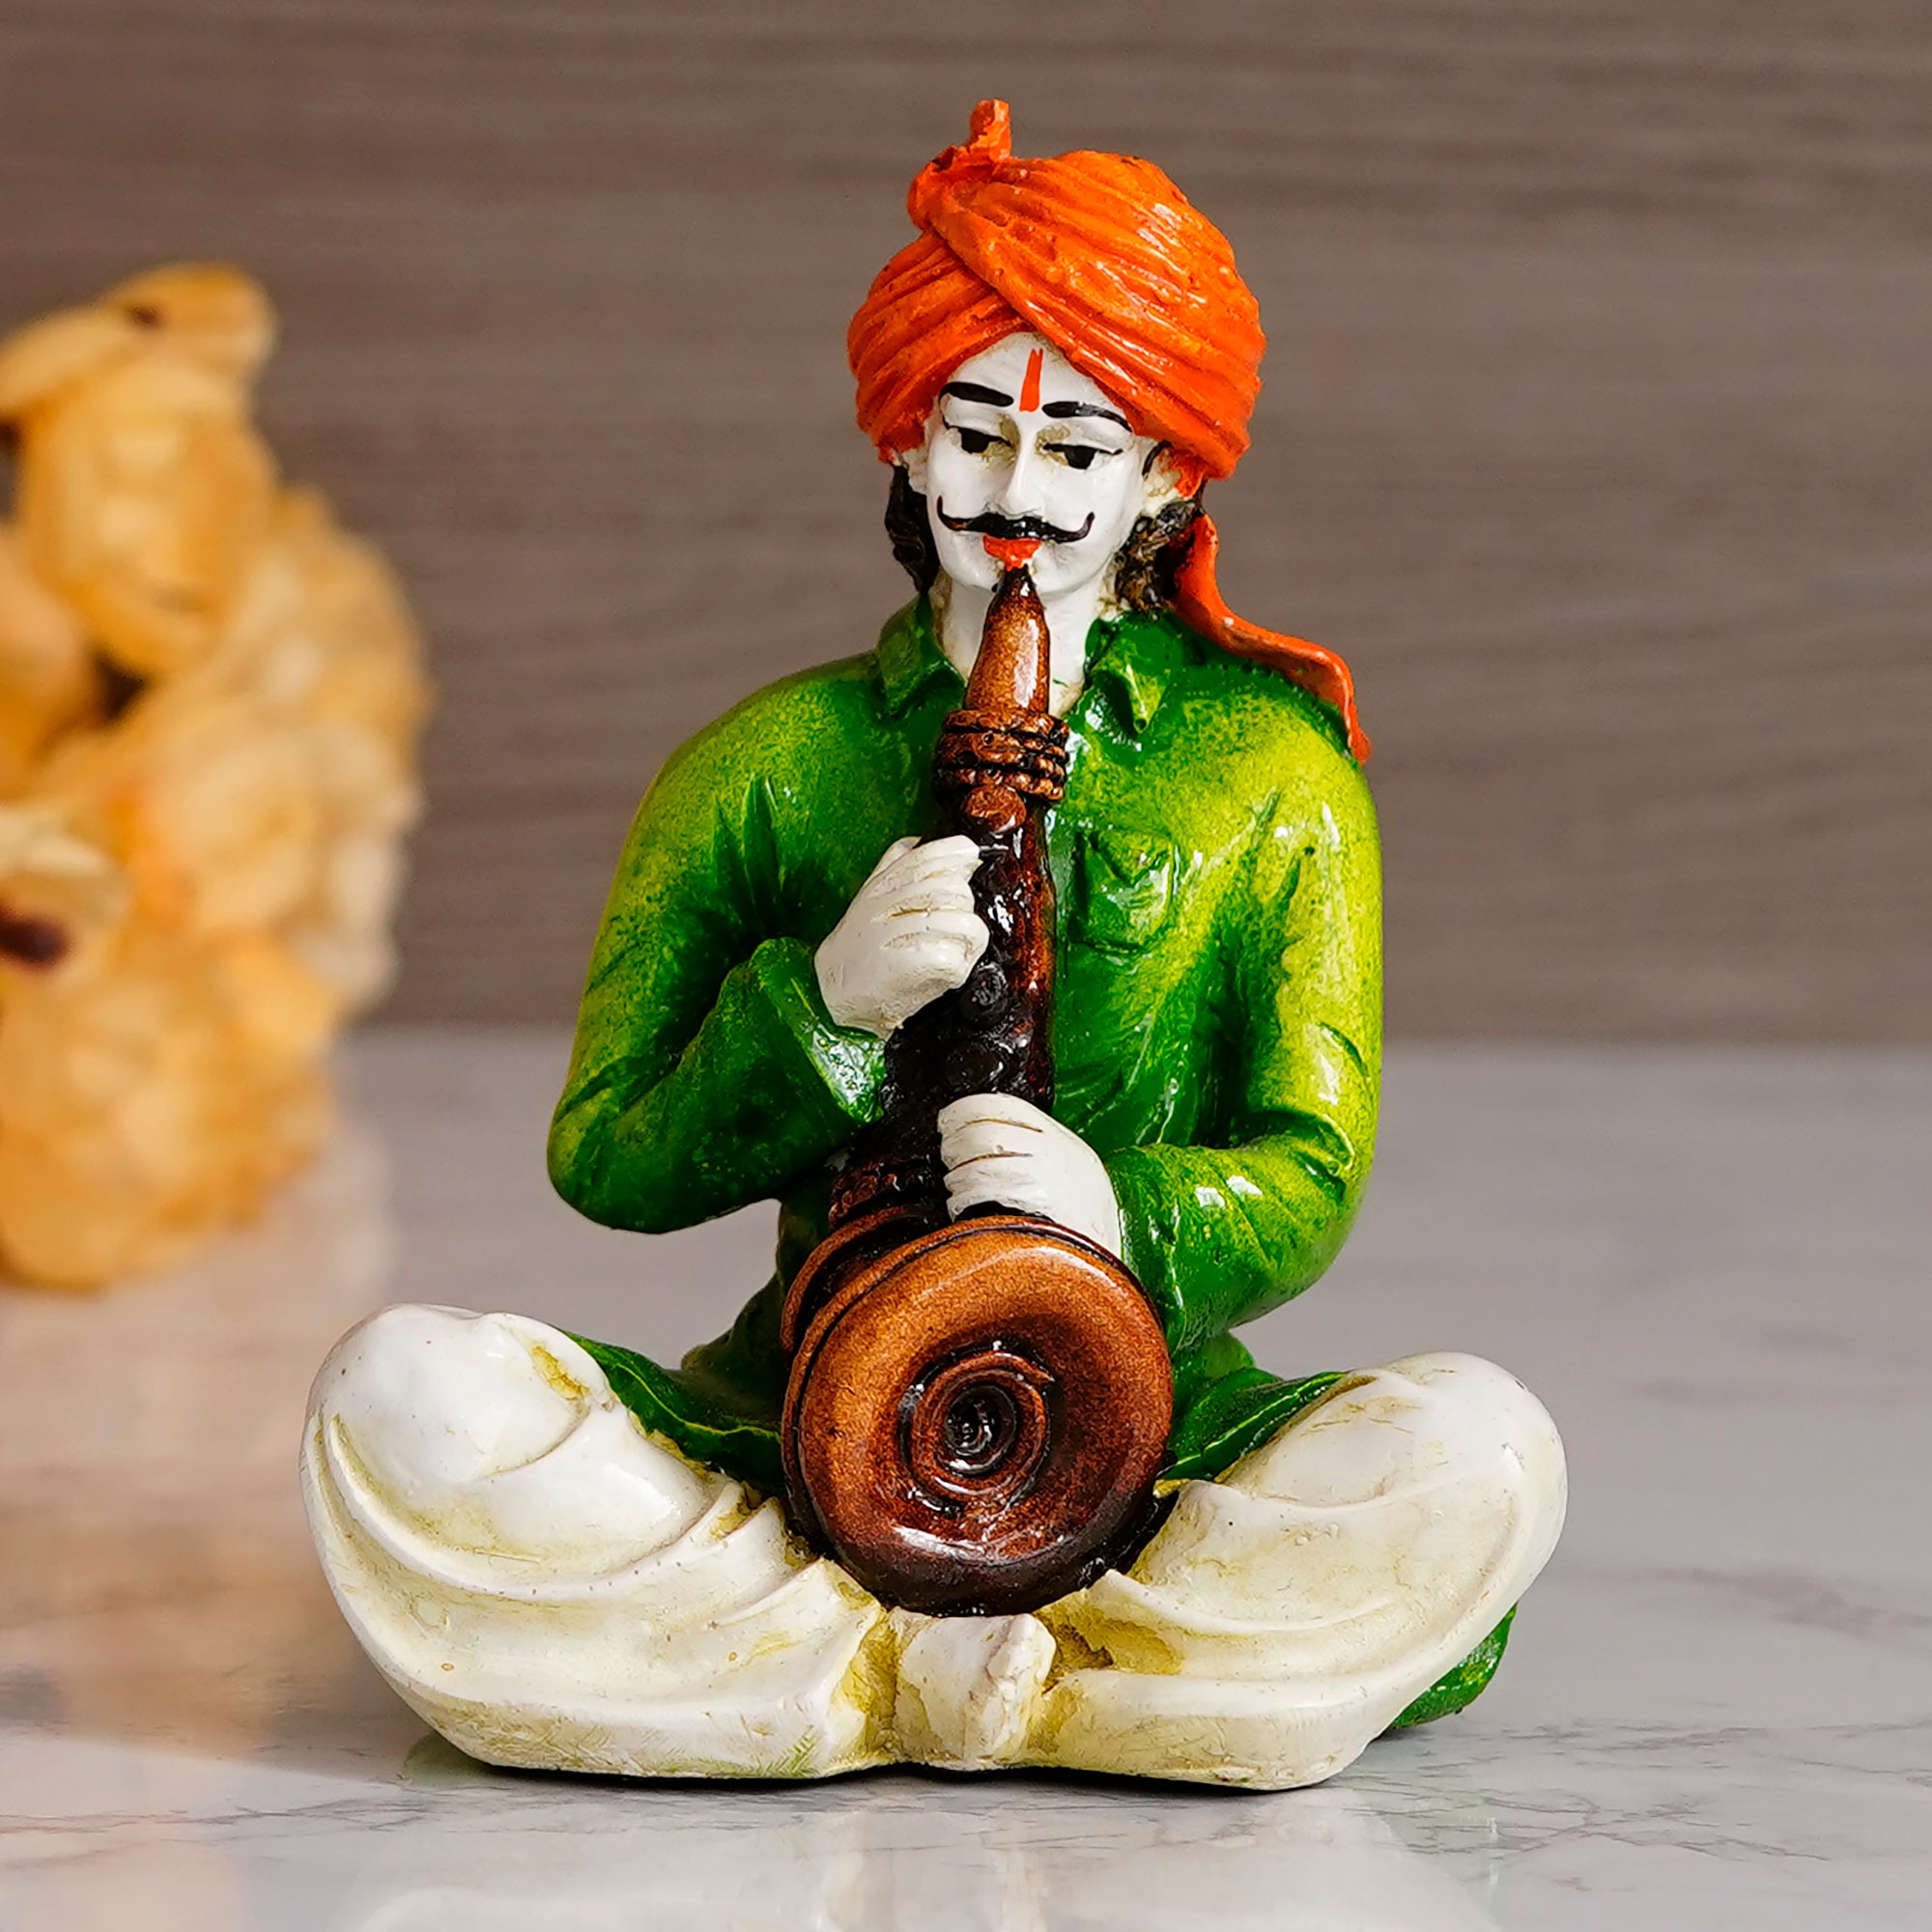 Polyresin Rajasthani Musician Men Statue Playing Musical Instrument Human Figurines Home Decor Showpiece 1